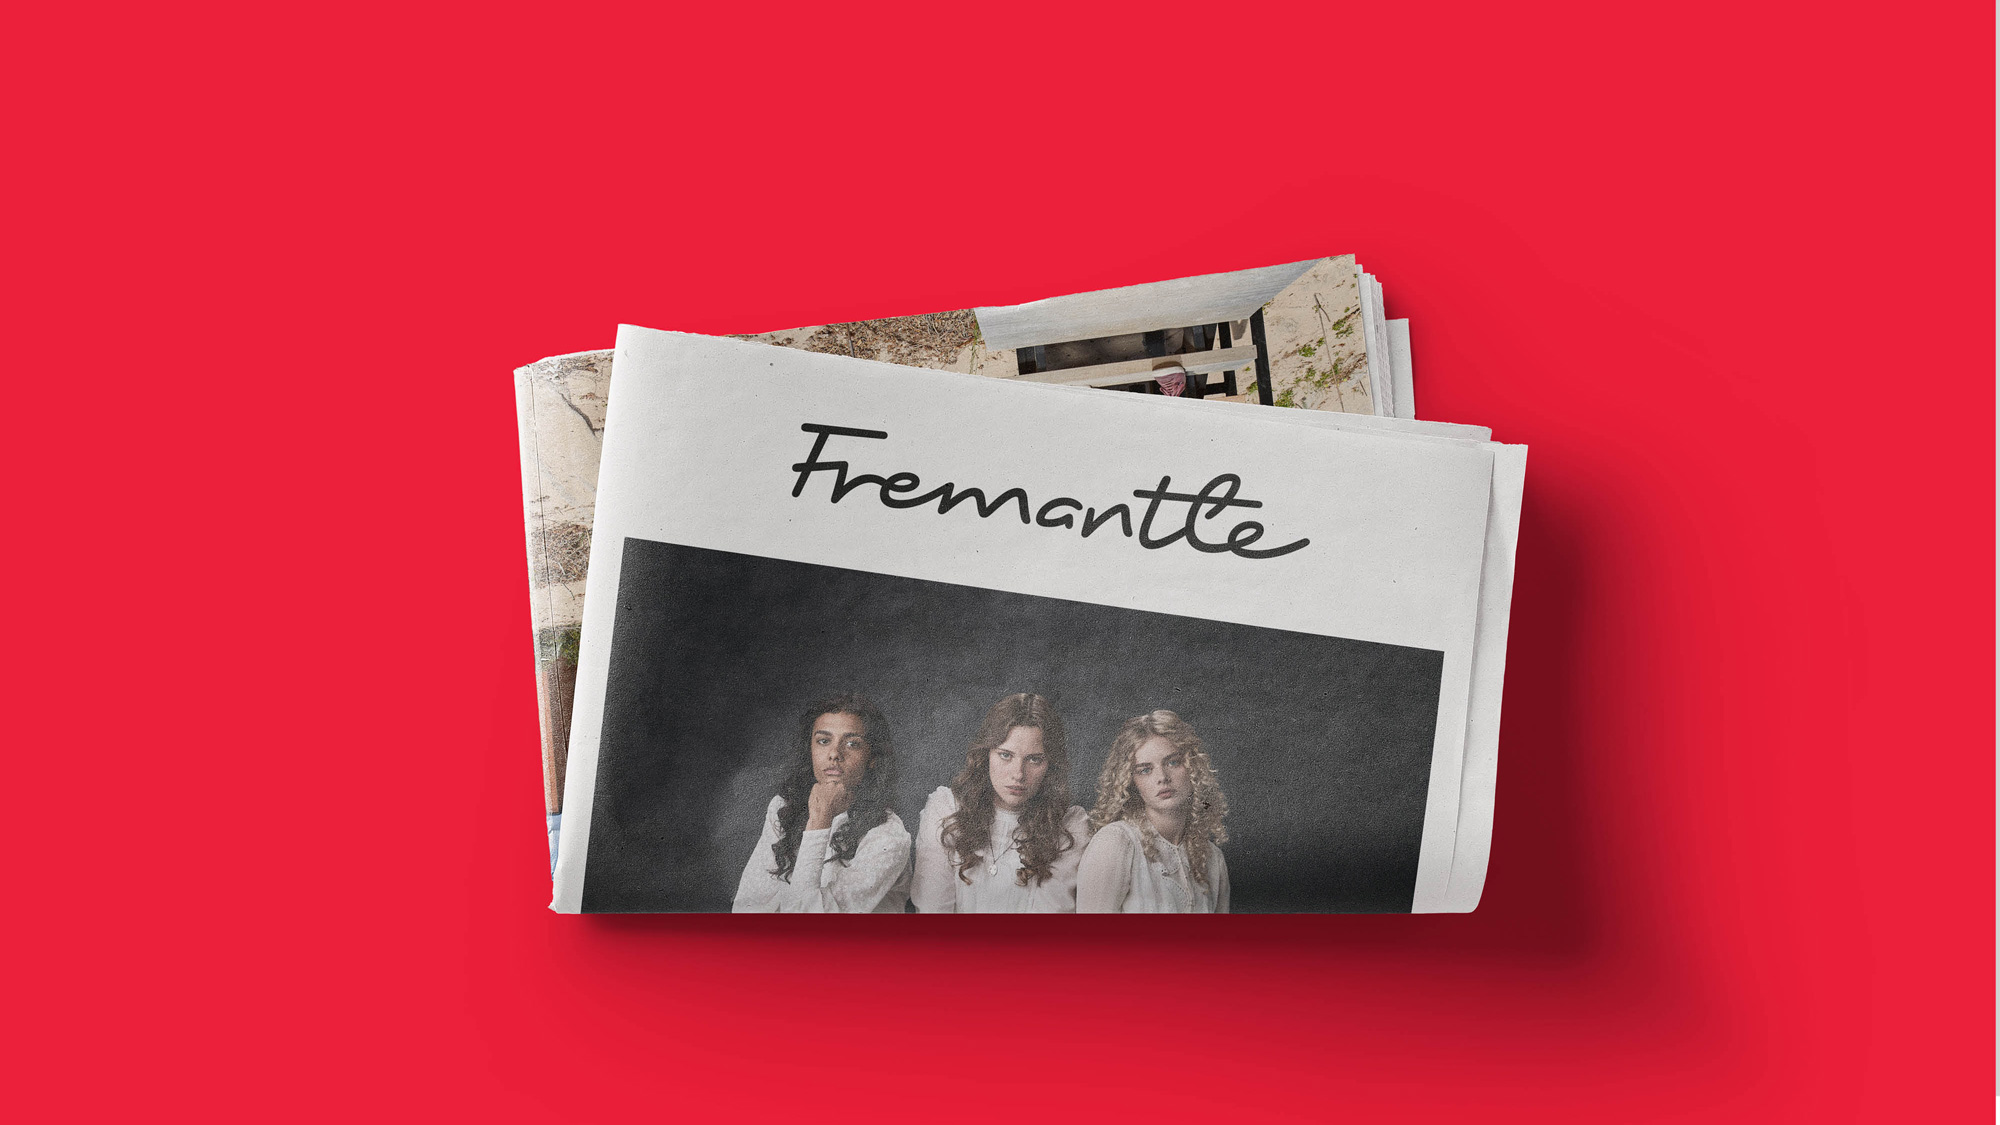 New Logo and Identity for Fremantle by venturethree